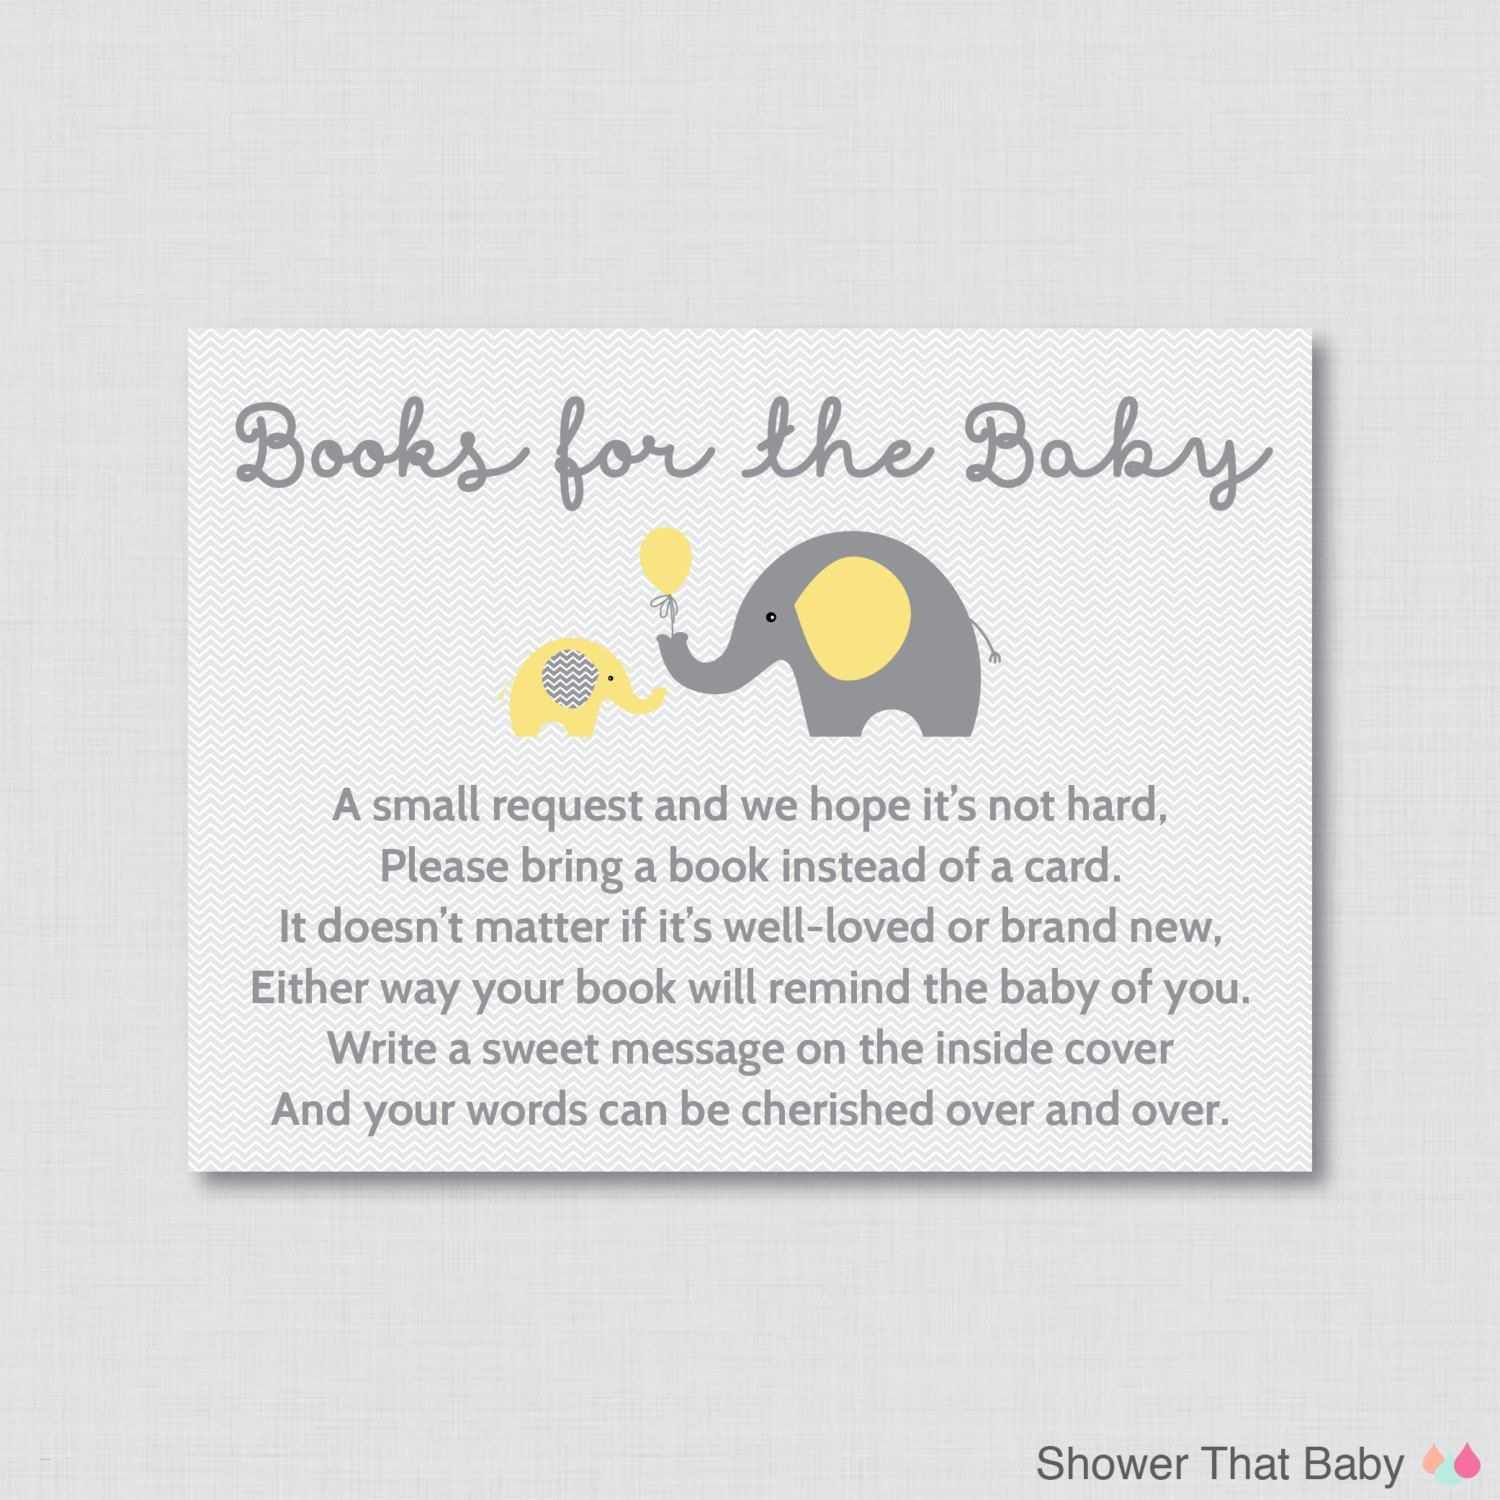 Full Size of Baby Shower:49+ Prime Baby Shower Card Message Photo Concepts Baby Shower Names Baby Shower Photos Baby Shower Recipes Baby Shower De Niño Recuerdos De Baby Shower Baby Shower Images